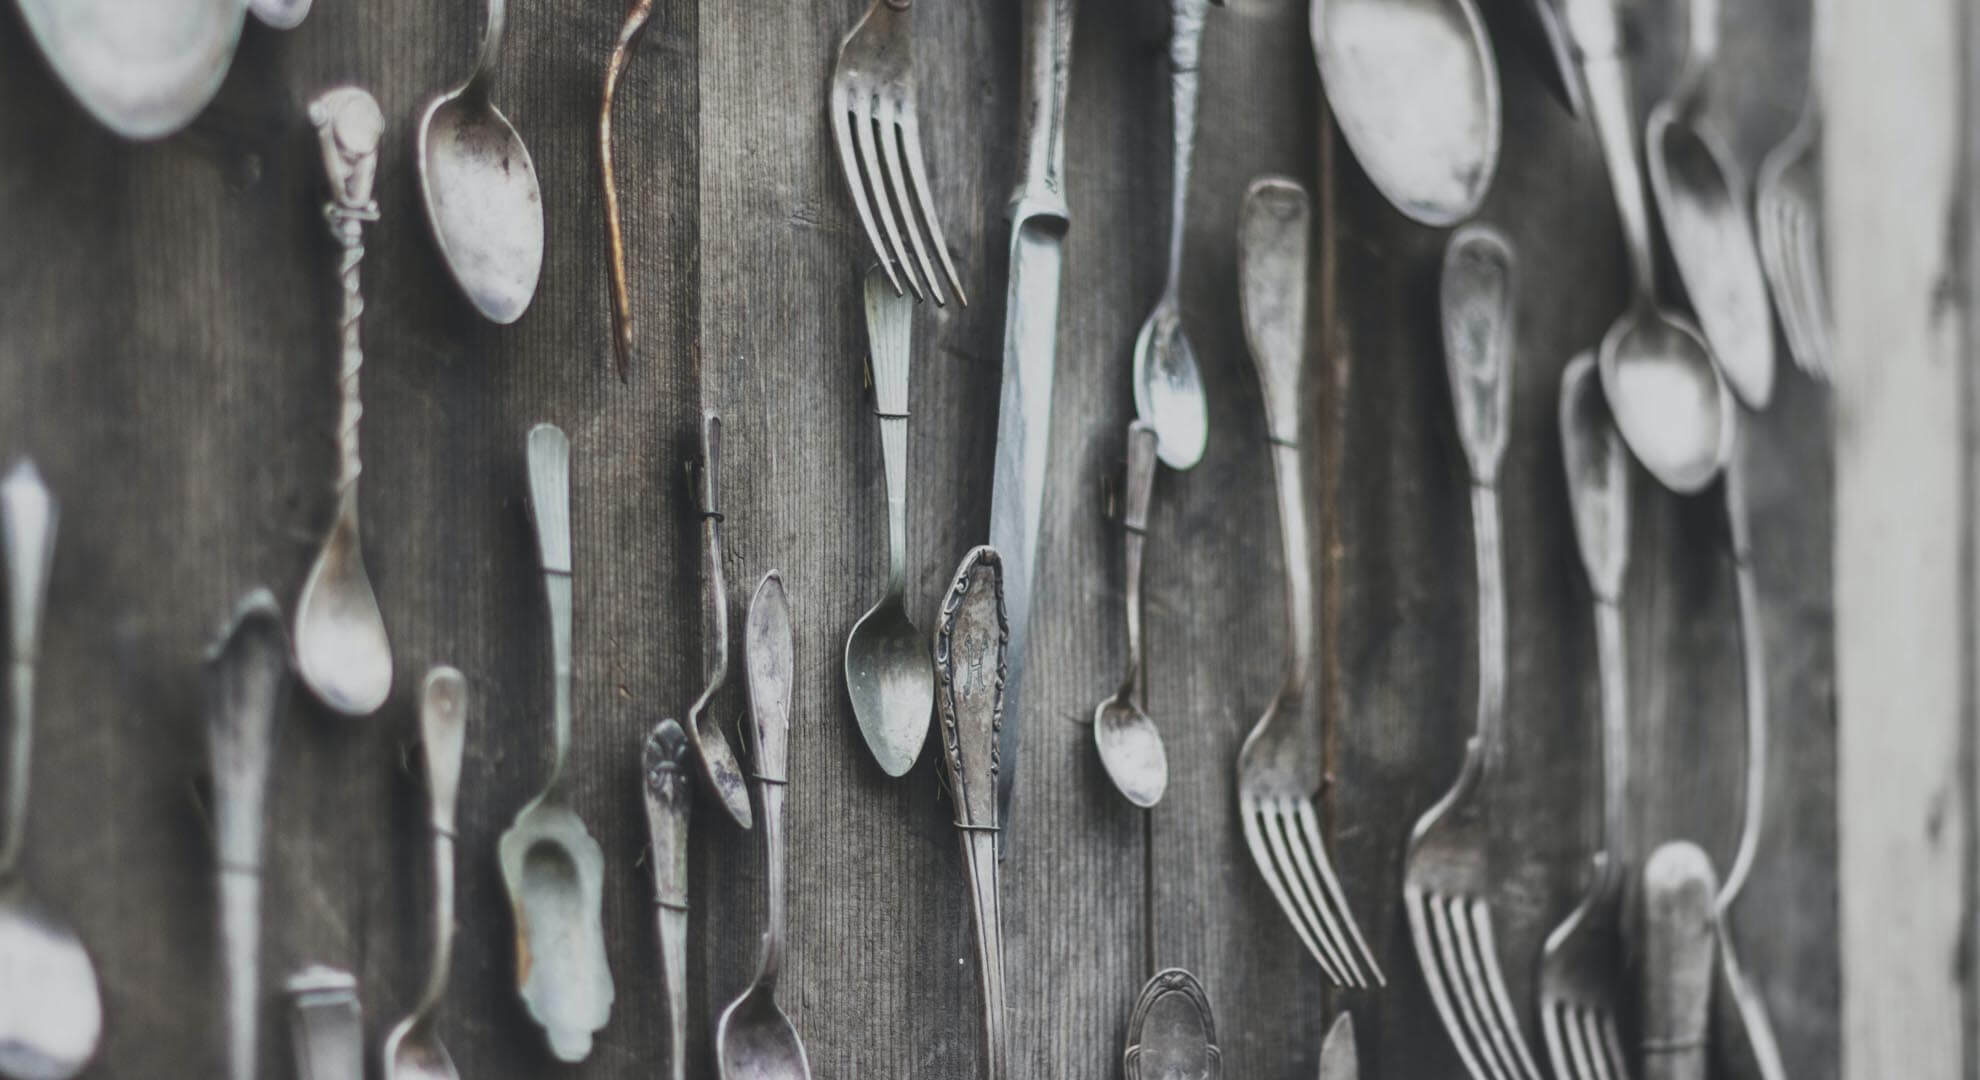 A selection of old cutlery